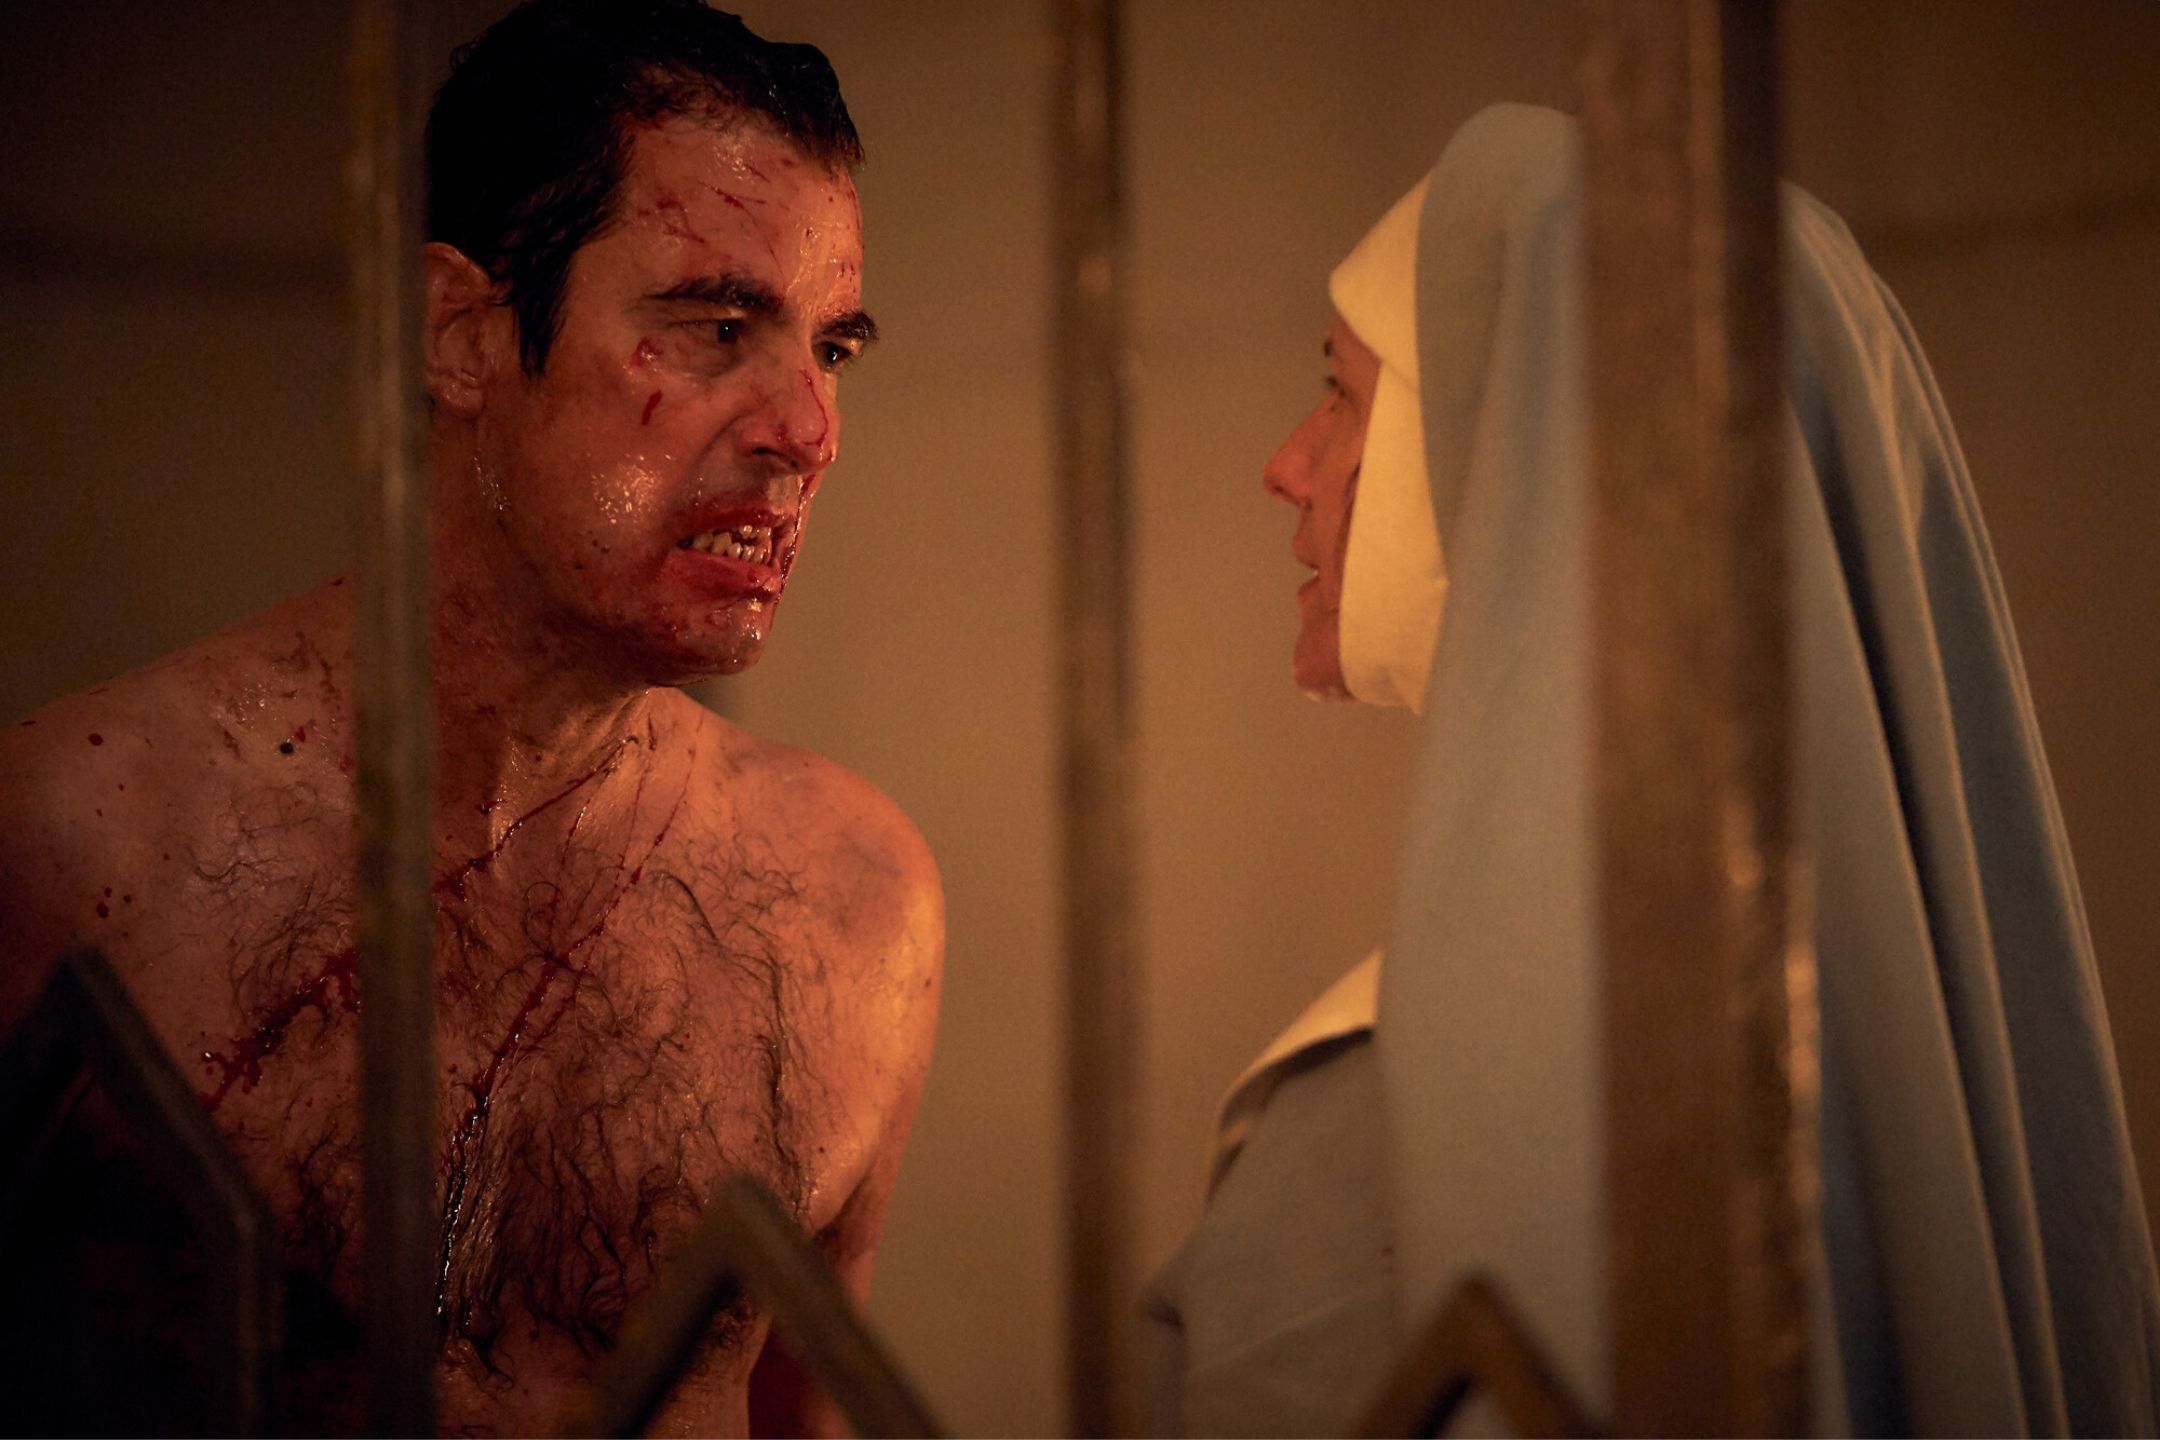 Dracula, covered in flecks of blood confronts a nun